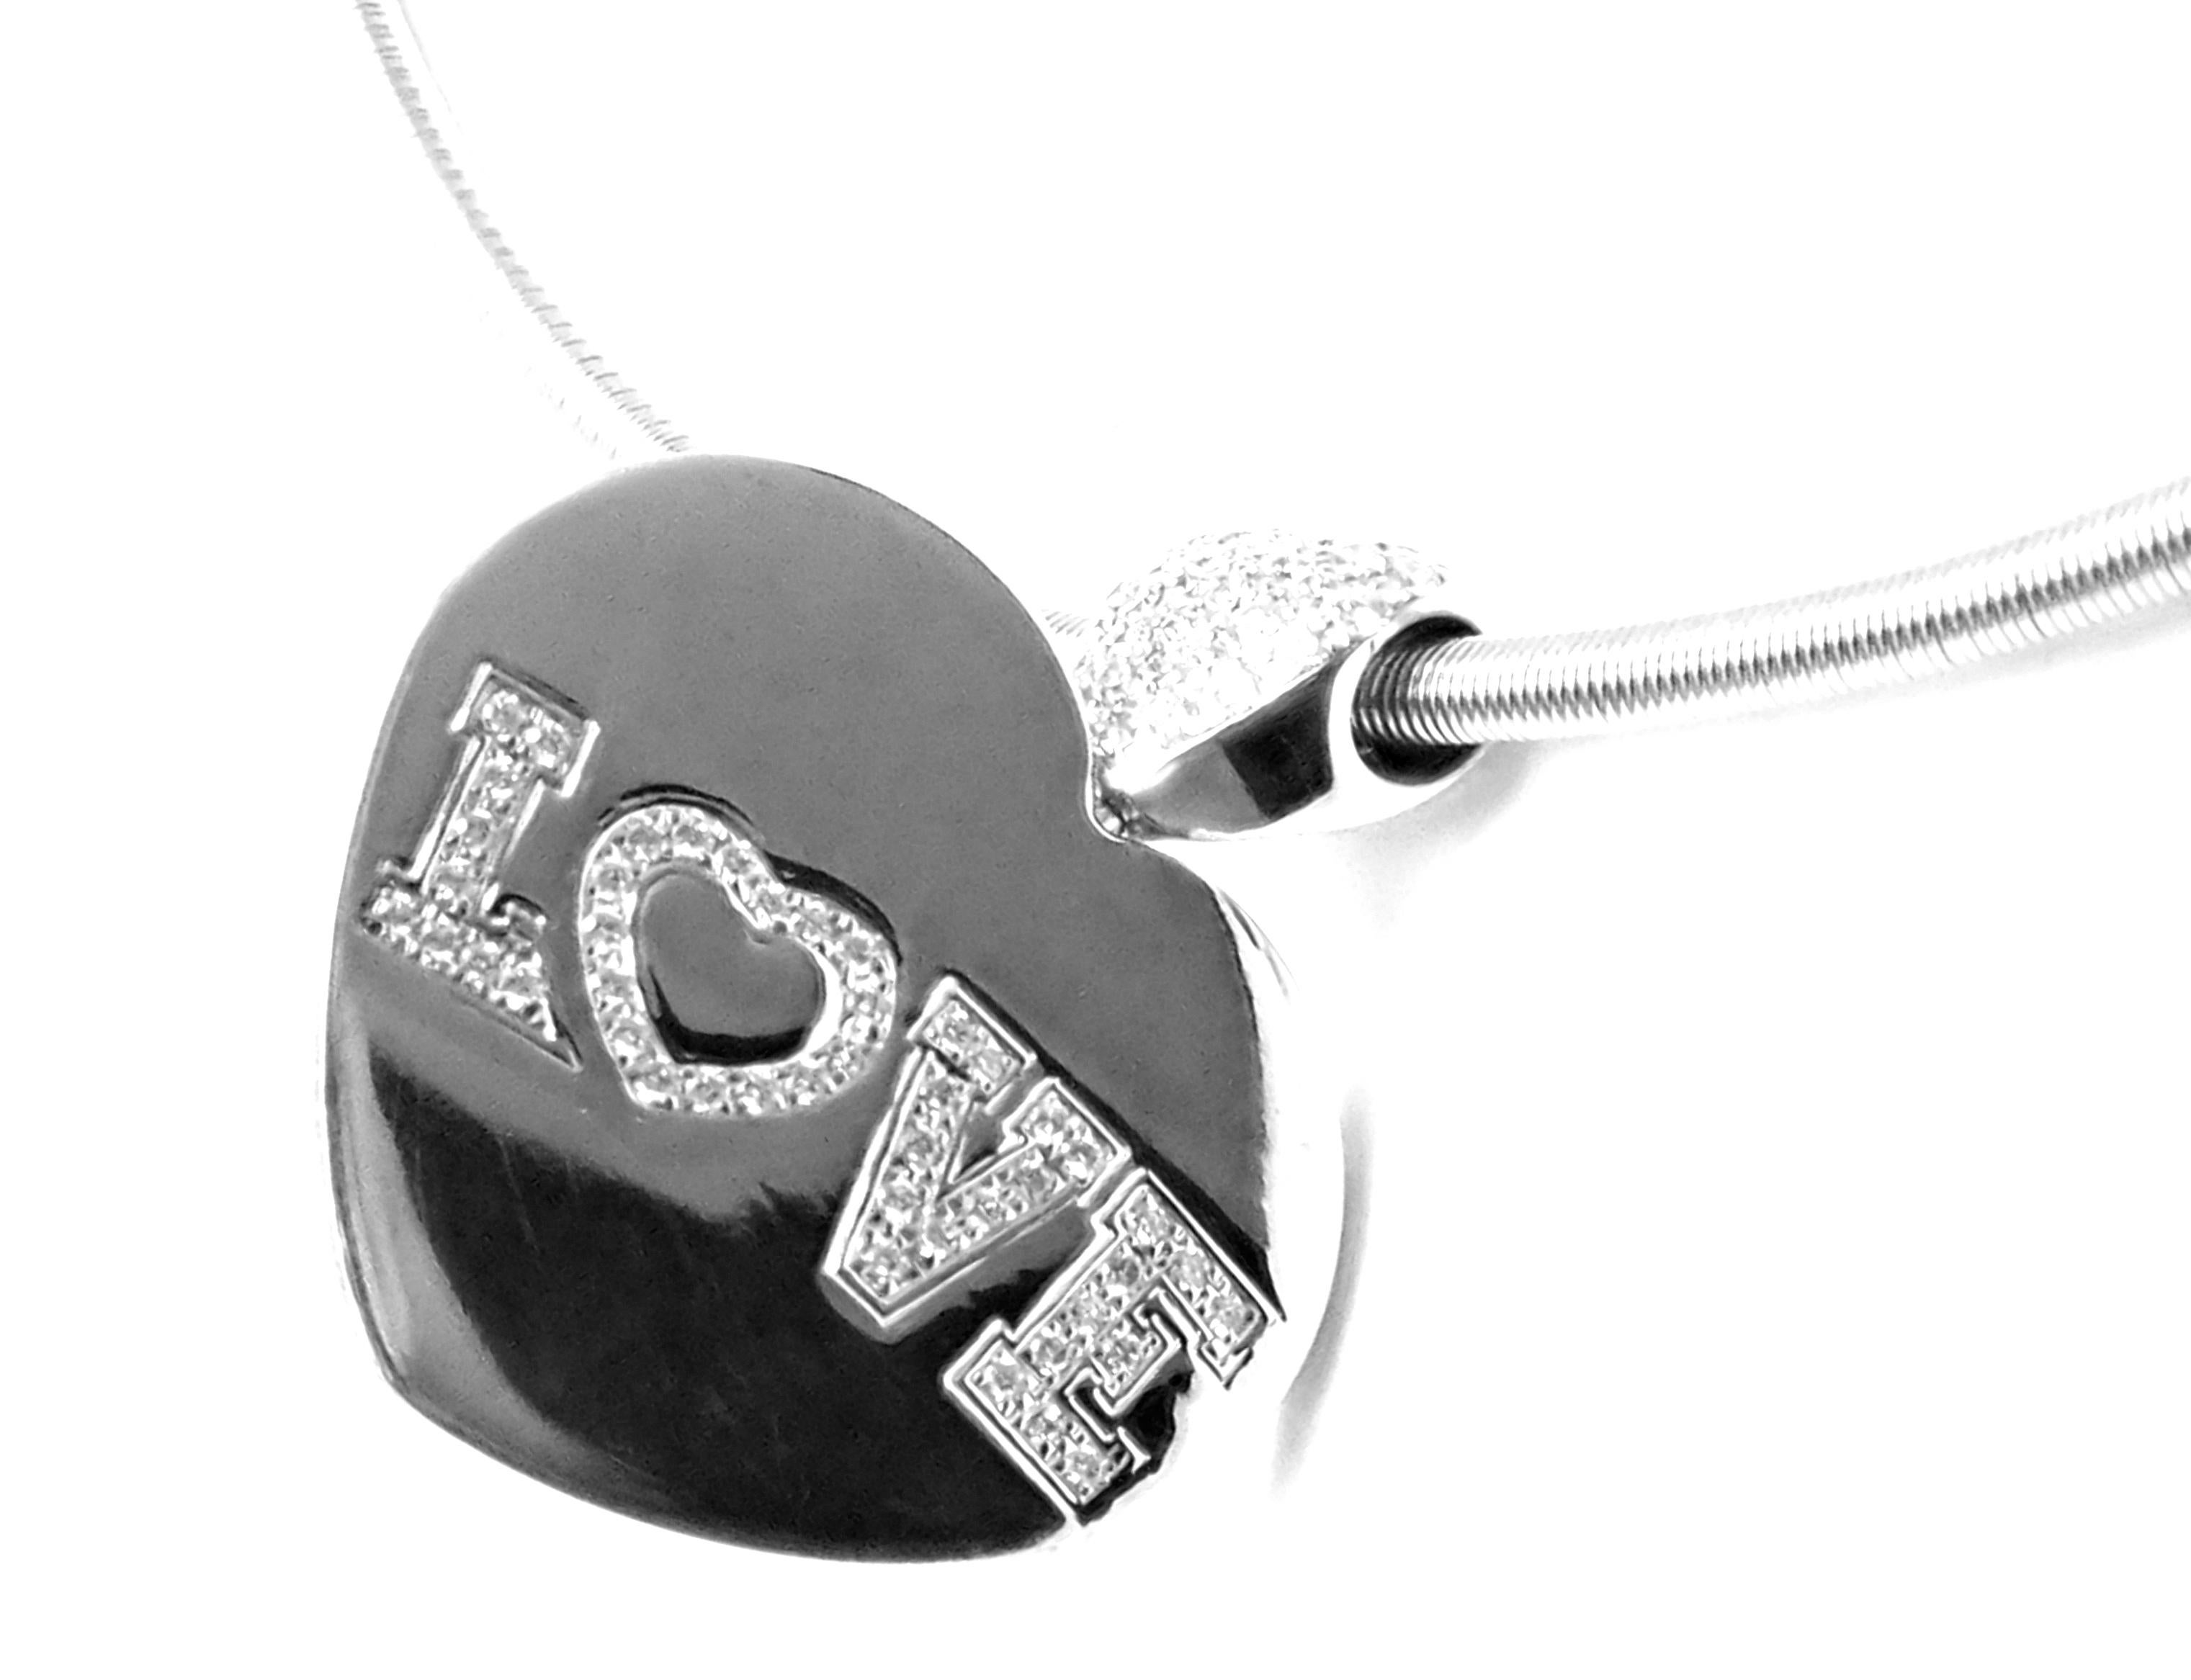 Estate 18k White Gold Diamond Love Heart Pendant Necklace.
With Round Brilliant Cut Diamonds SI1 clarity, G color total weight approximately 1ct
Details:
Pendant: 32mm x 27mm
Weight: 36.3 grams
Chain Length: 15